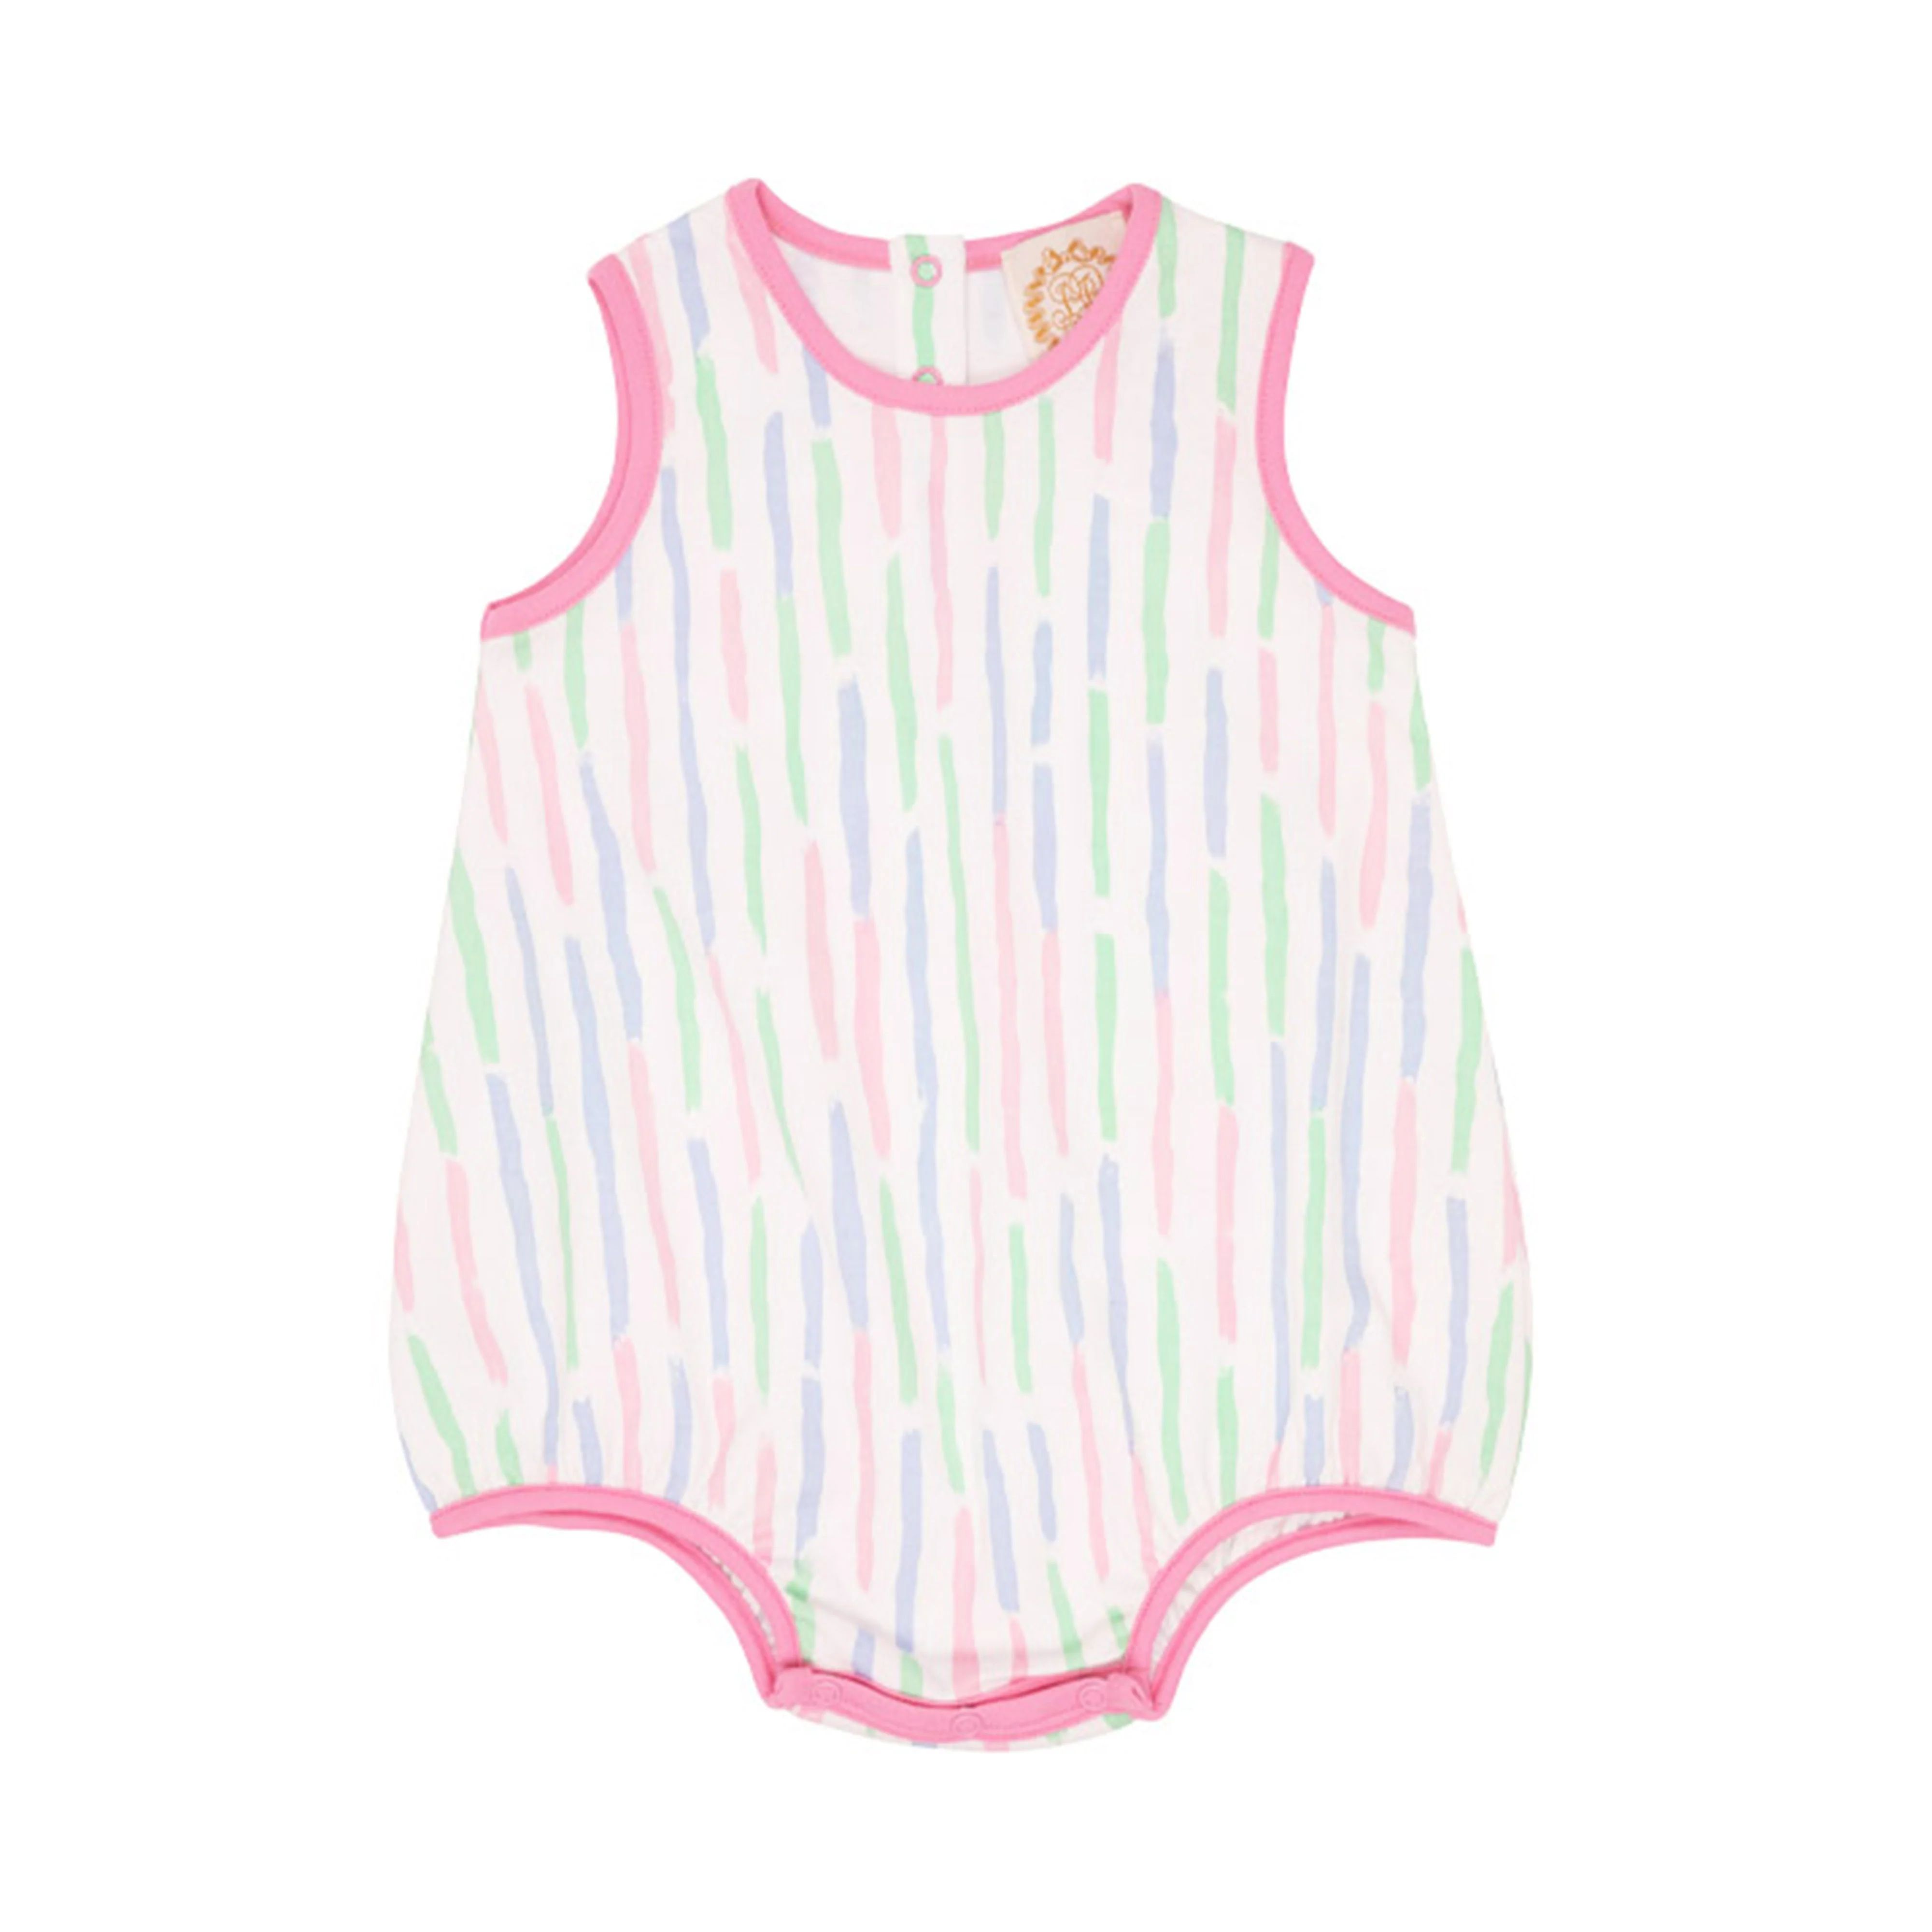 Patton Play Bubble - White Sand Watercolor with Hamptons Hot Pink | The Beaufort Bonnet Company